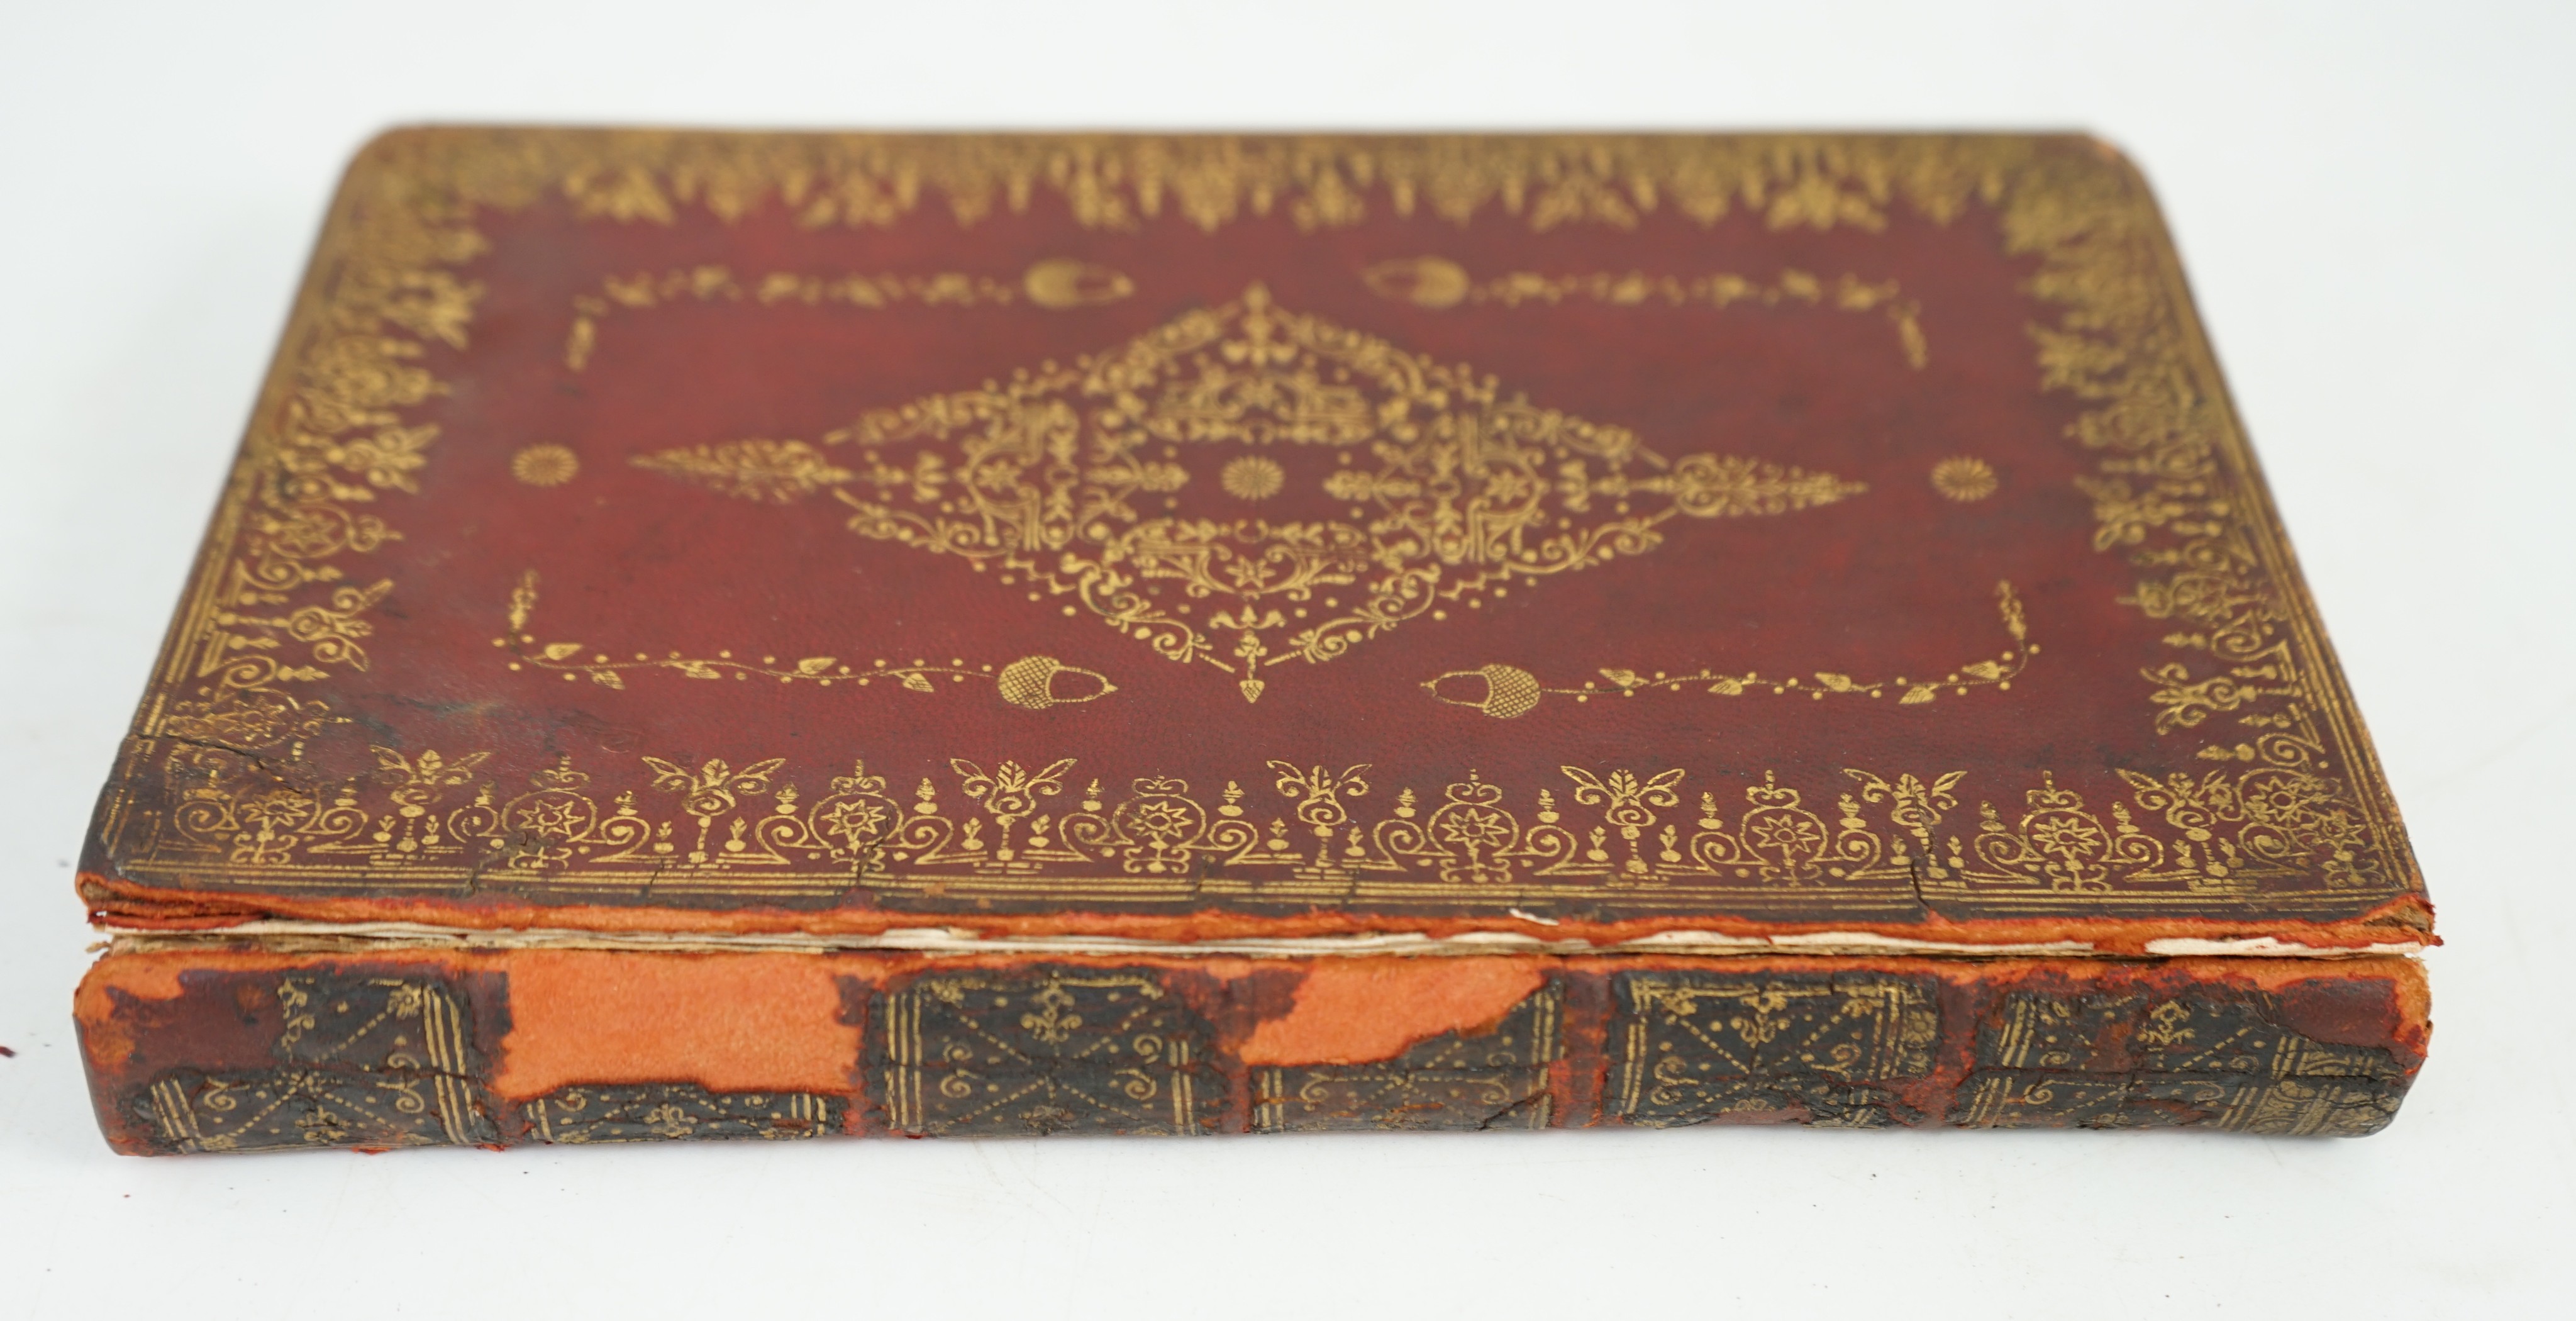 Book of Common Prayer and Administration of the Sacraments - Experimental edition, 8vo, red morocco, panel gilt embossed with lozenge devices and acorns, engraved title, portraits, volvelle to title verso, and vignette p